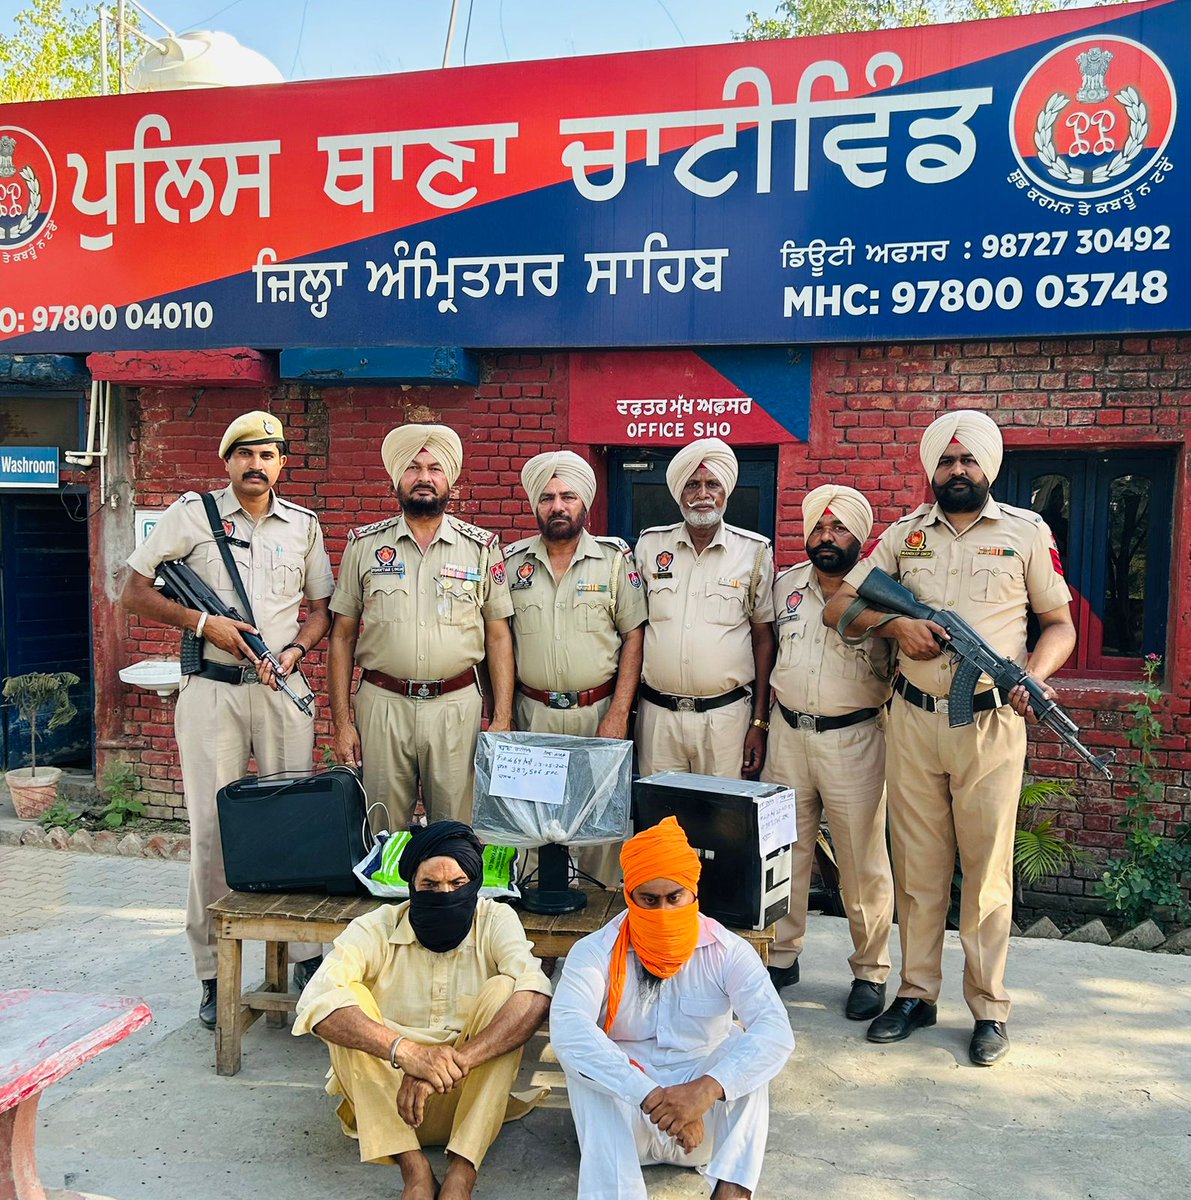 Amritsar Rural Police swiftly responded to a threatening letter on Babbar Khalsa International letterhead targeting a local factory owner & demanding ₹80 lakh extortion from him. 

An FIR was promptly registered against unknown perpetrators & utilizing advanced technical